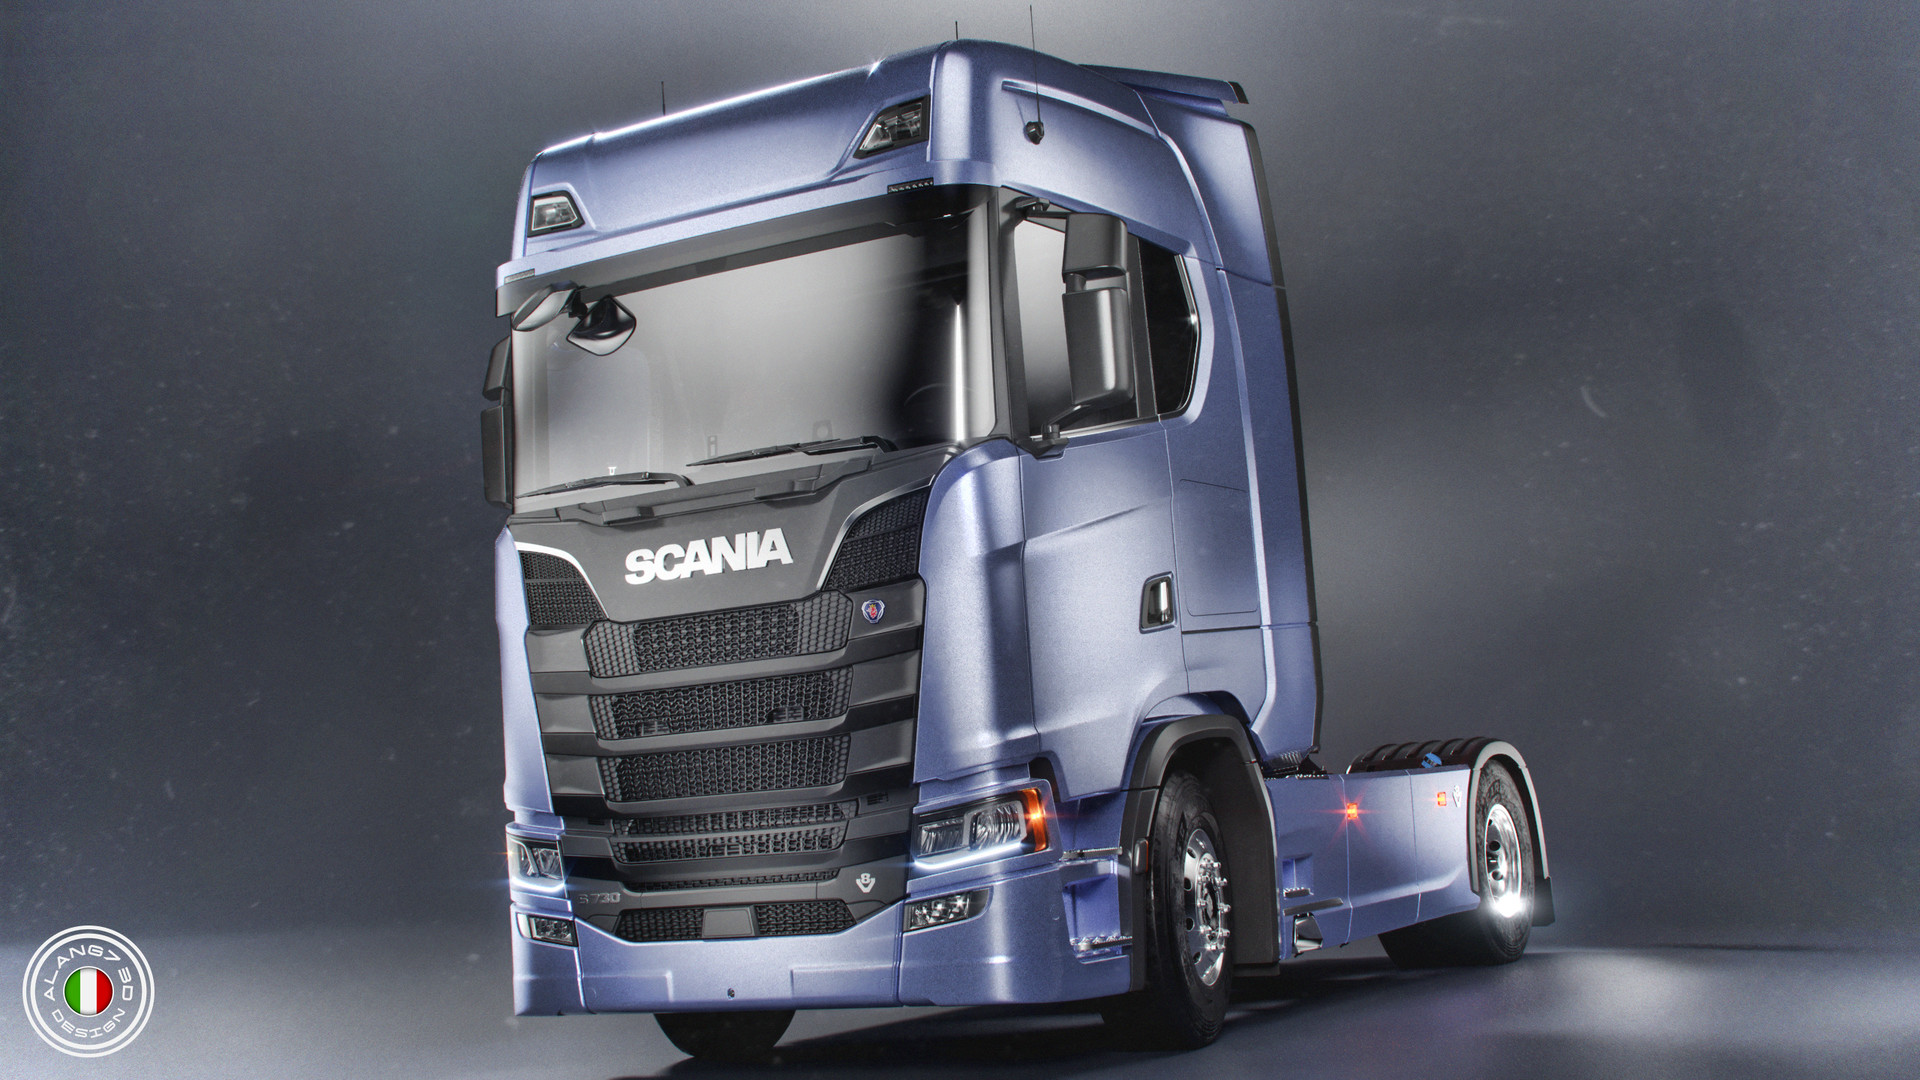 Scroll To See More - 2018 Scania Scania S730 , HD Wallpaper & Backgrounds